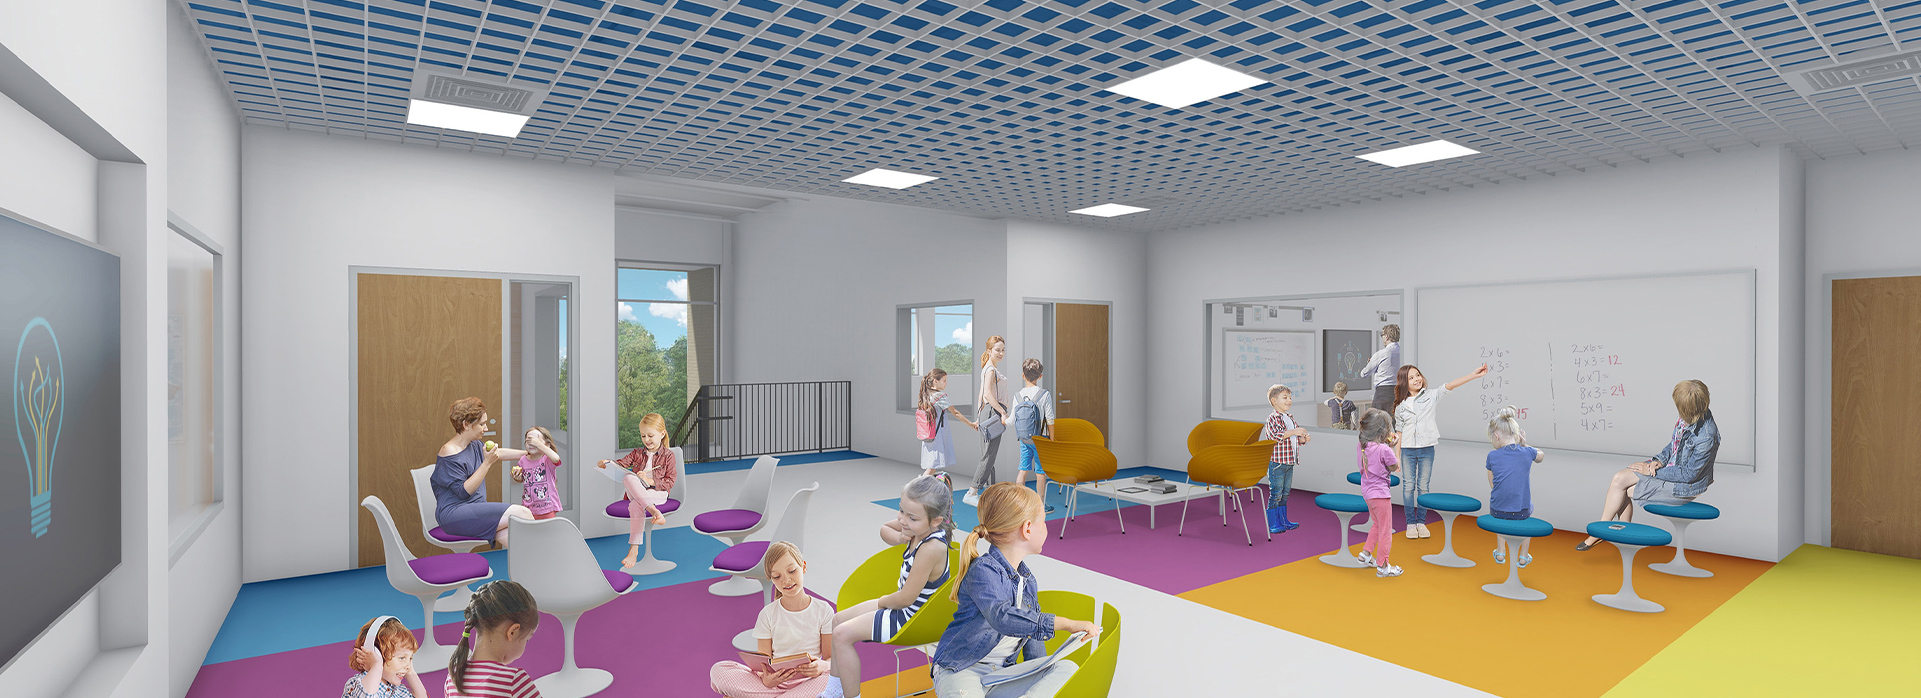 35 North Provides Cost Estimating Services to the Wake County Public School System for the Renovation of Conn Elementary School in Raleigh, NC